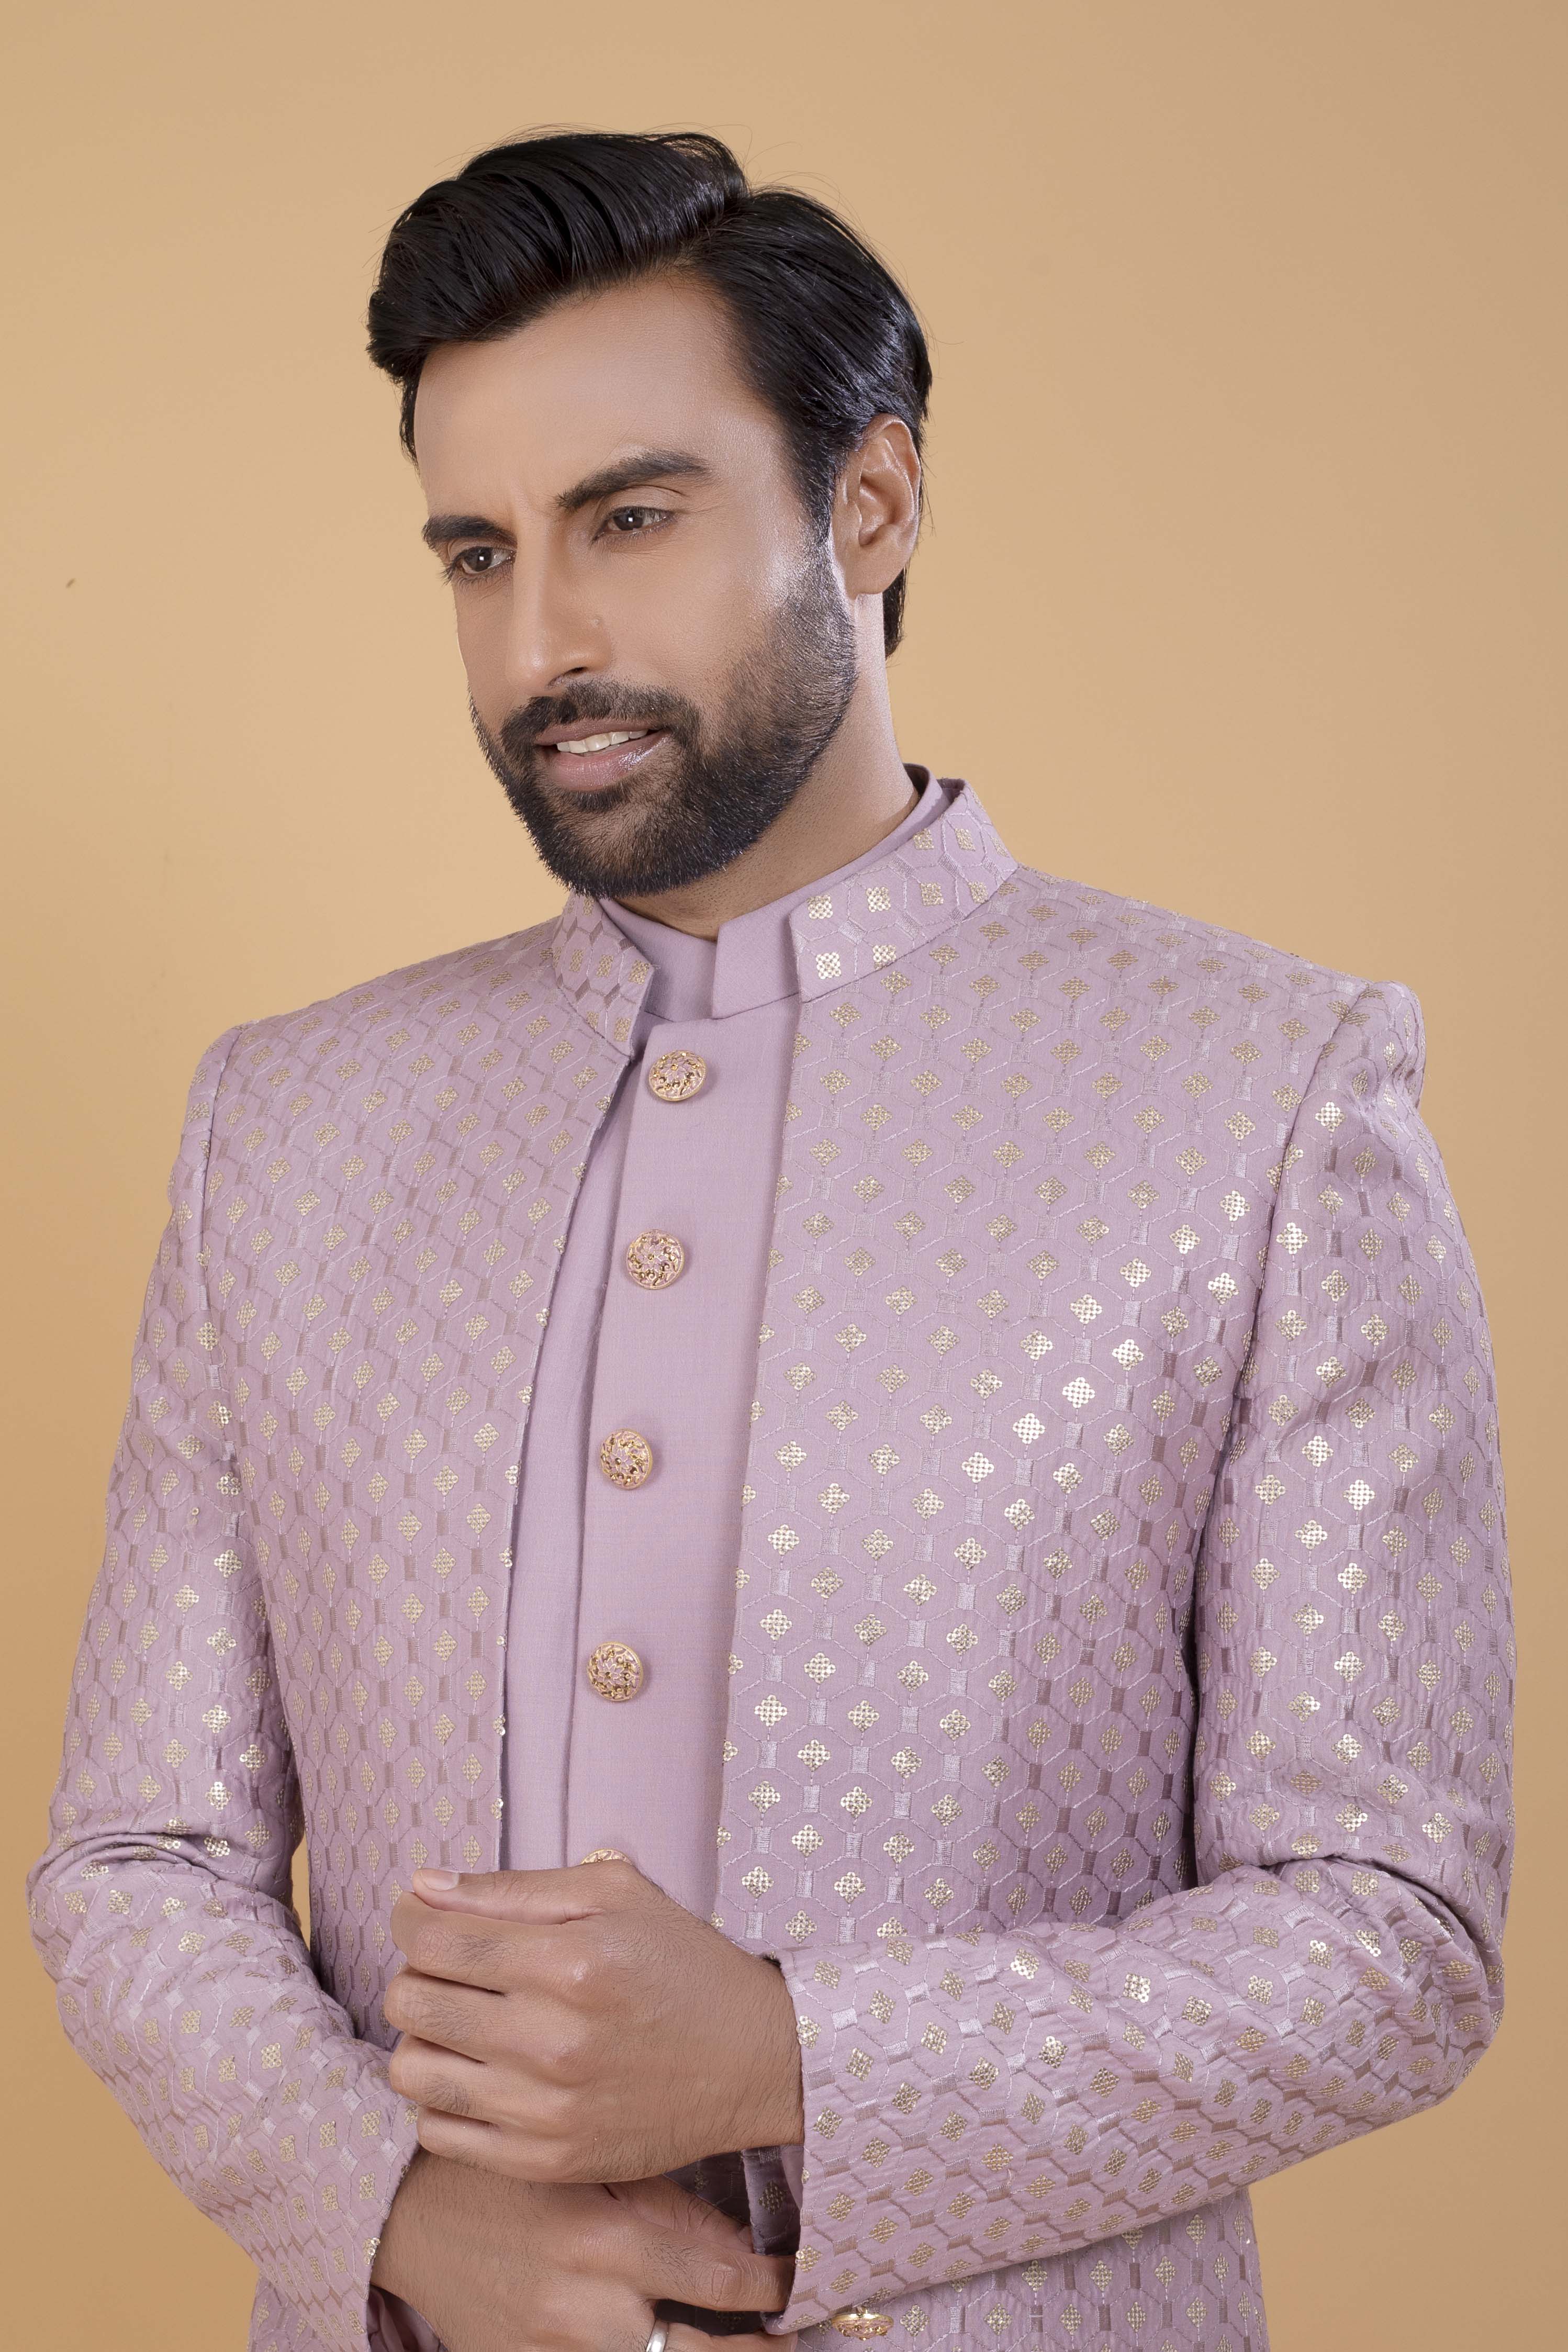 Indian Outfit (Dresses) for Men - Latest & Traditional Dress for Men